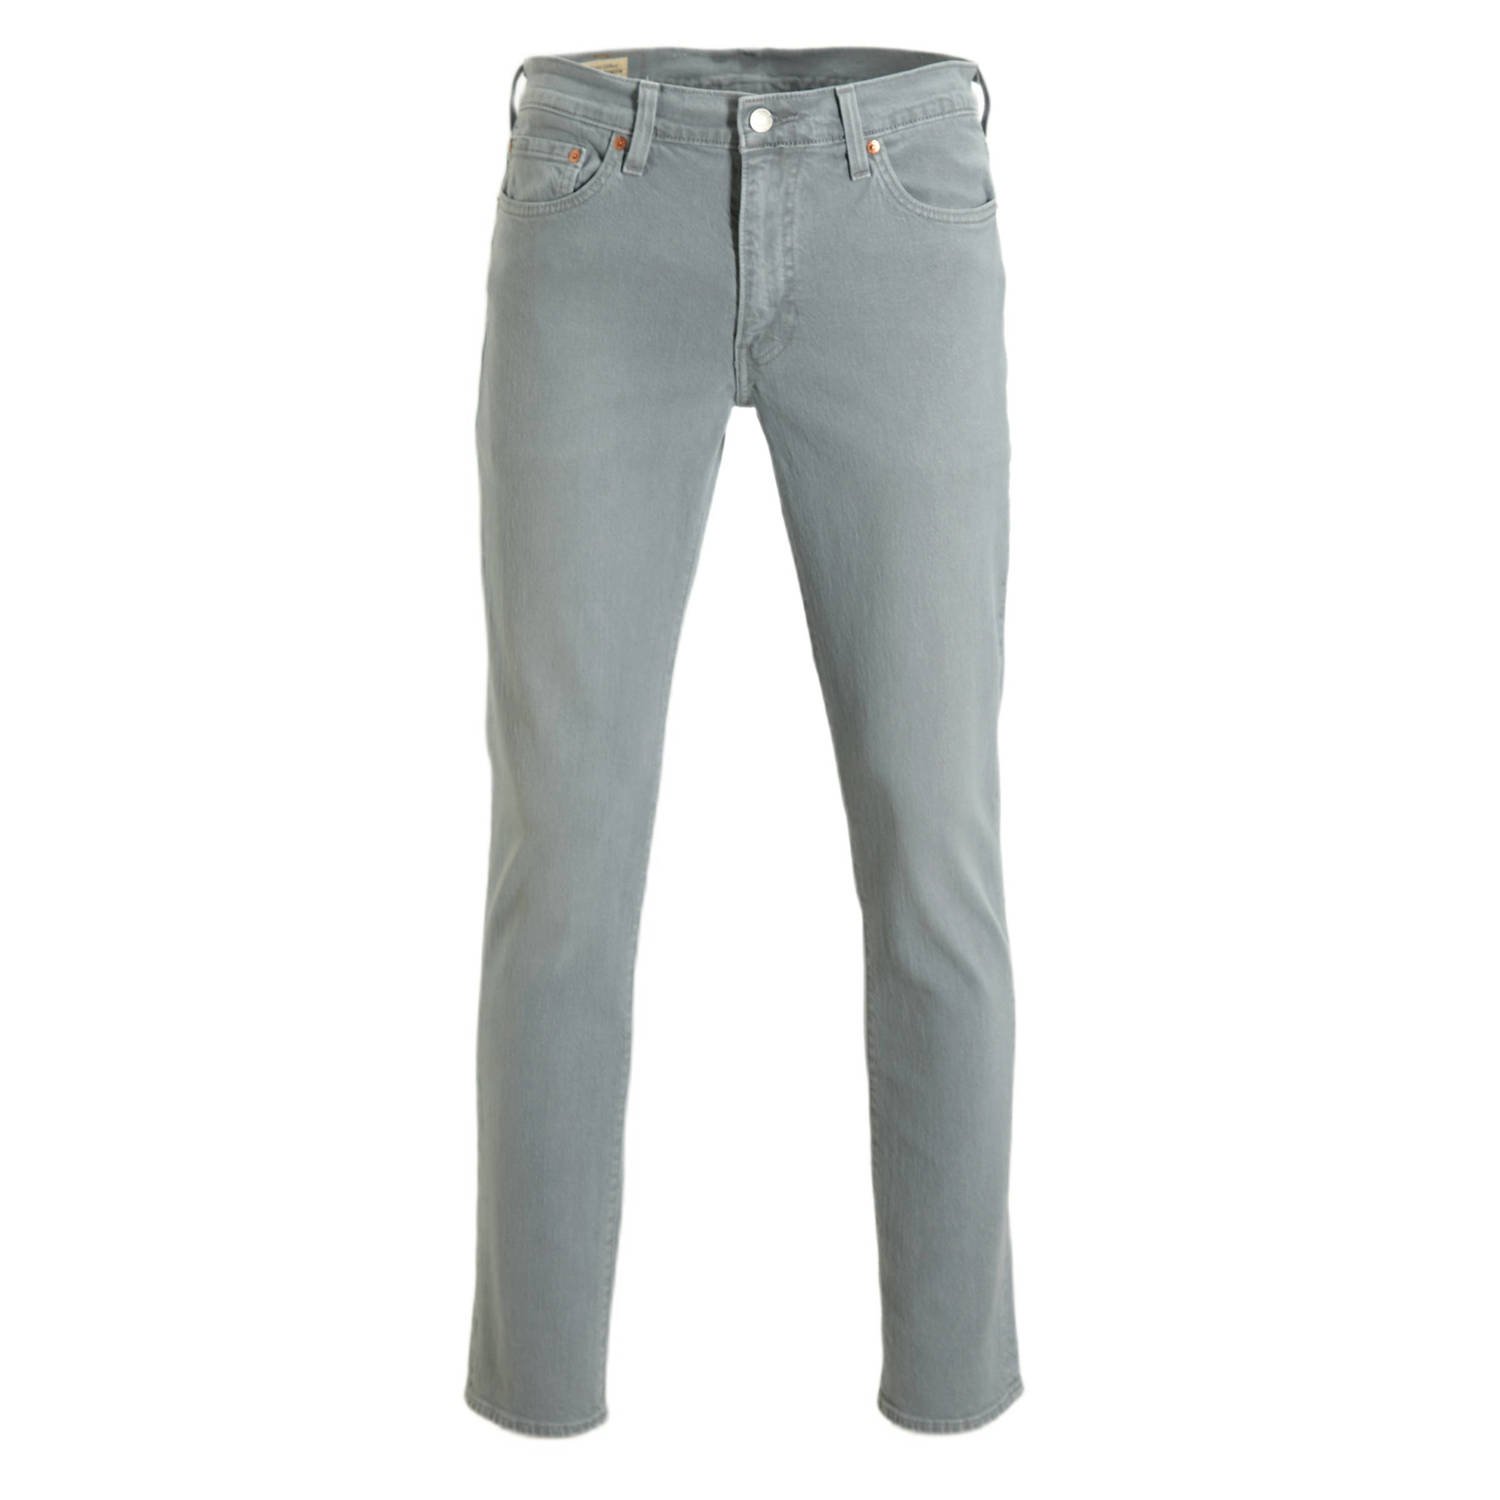 Levi's 511 slim fit jeans touch of frost